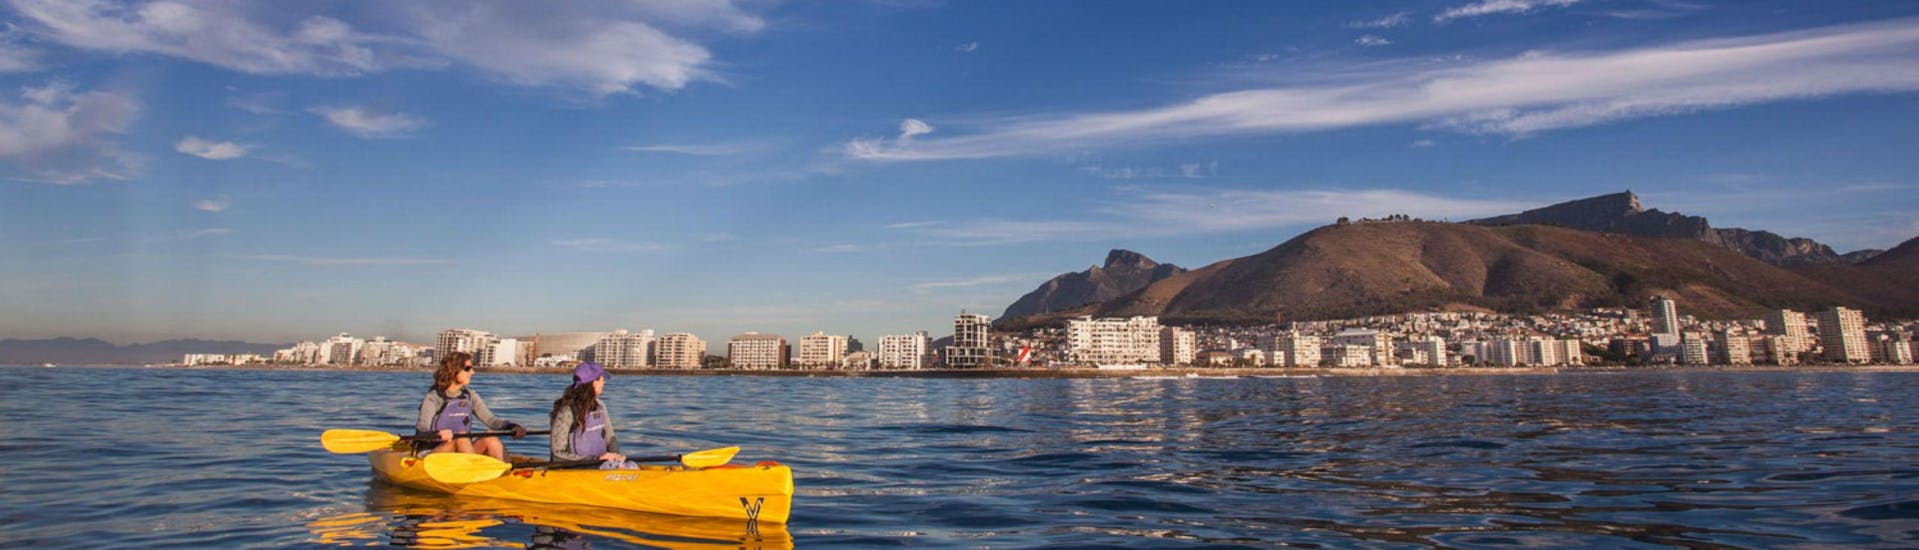 Two women are sea kayaking off the coast of Cape Town, a popular activity offered by Gravity Adventures.